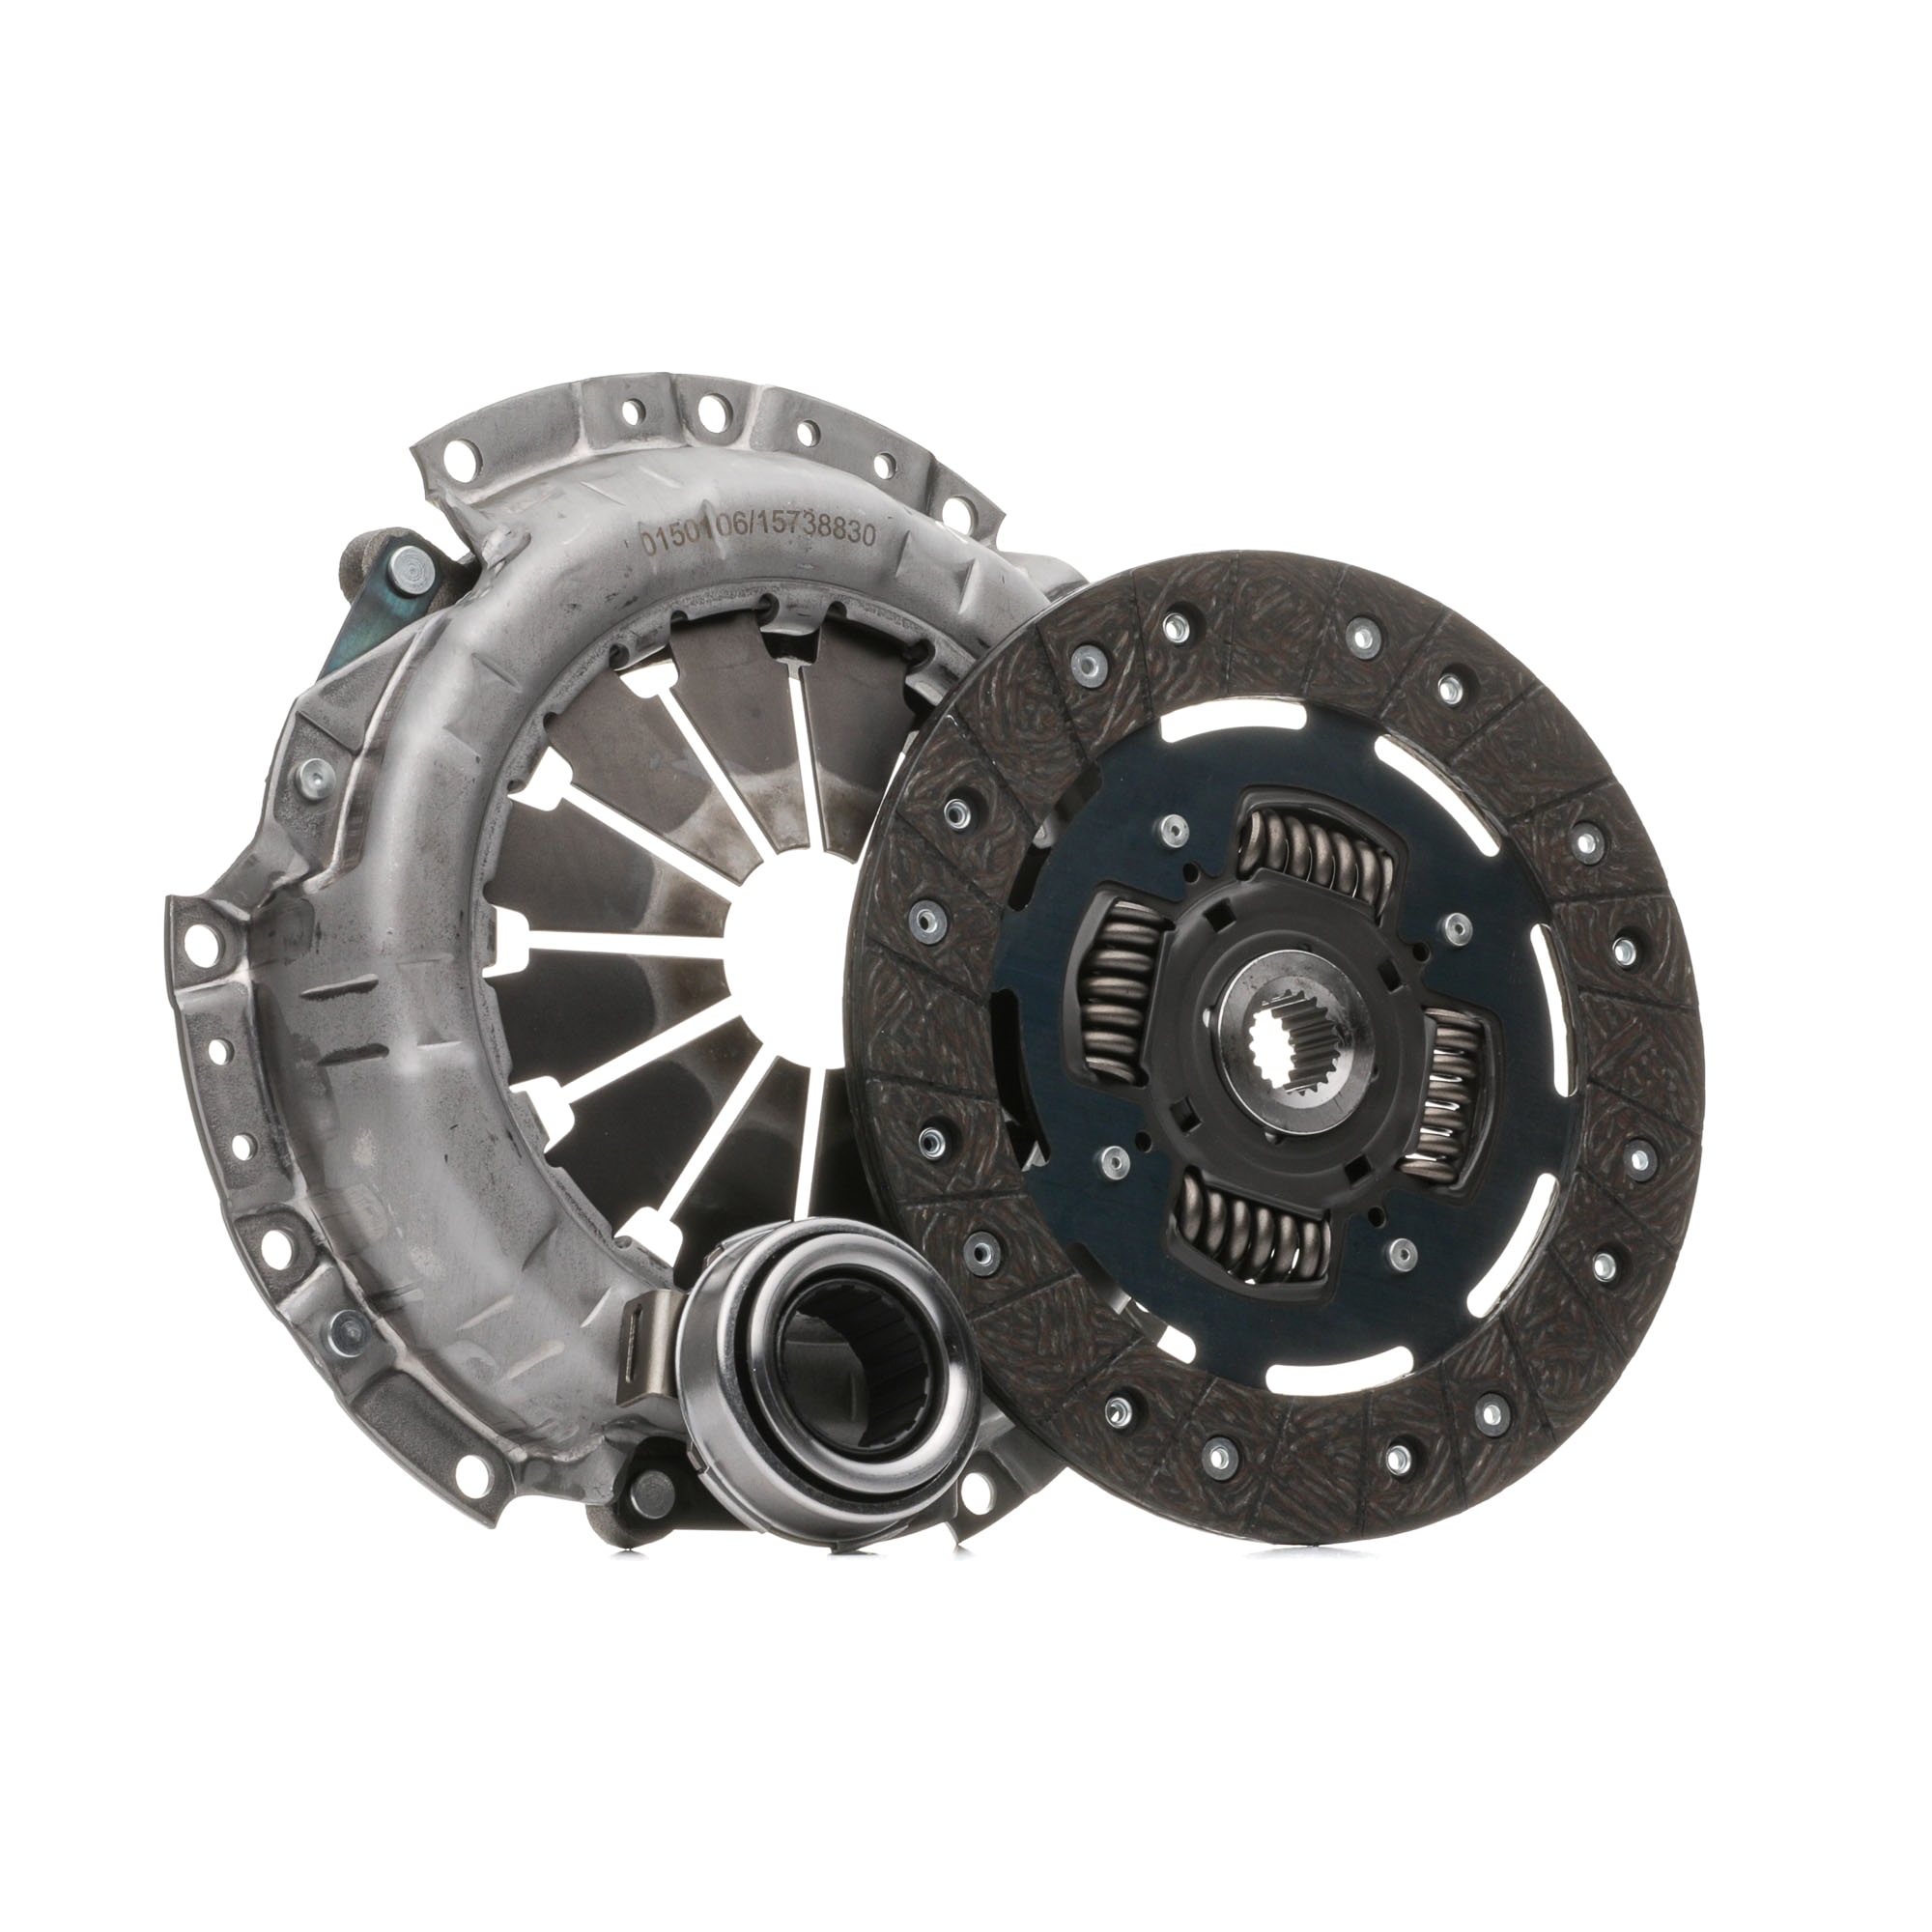 STARK SKCK-0100834 Clutch kit with clutch release bearing, with clutch disc, 220mm